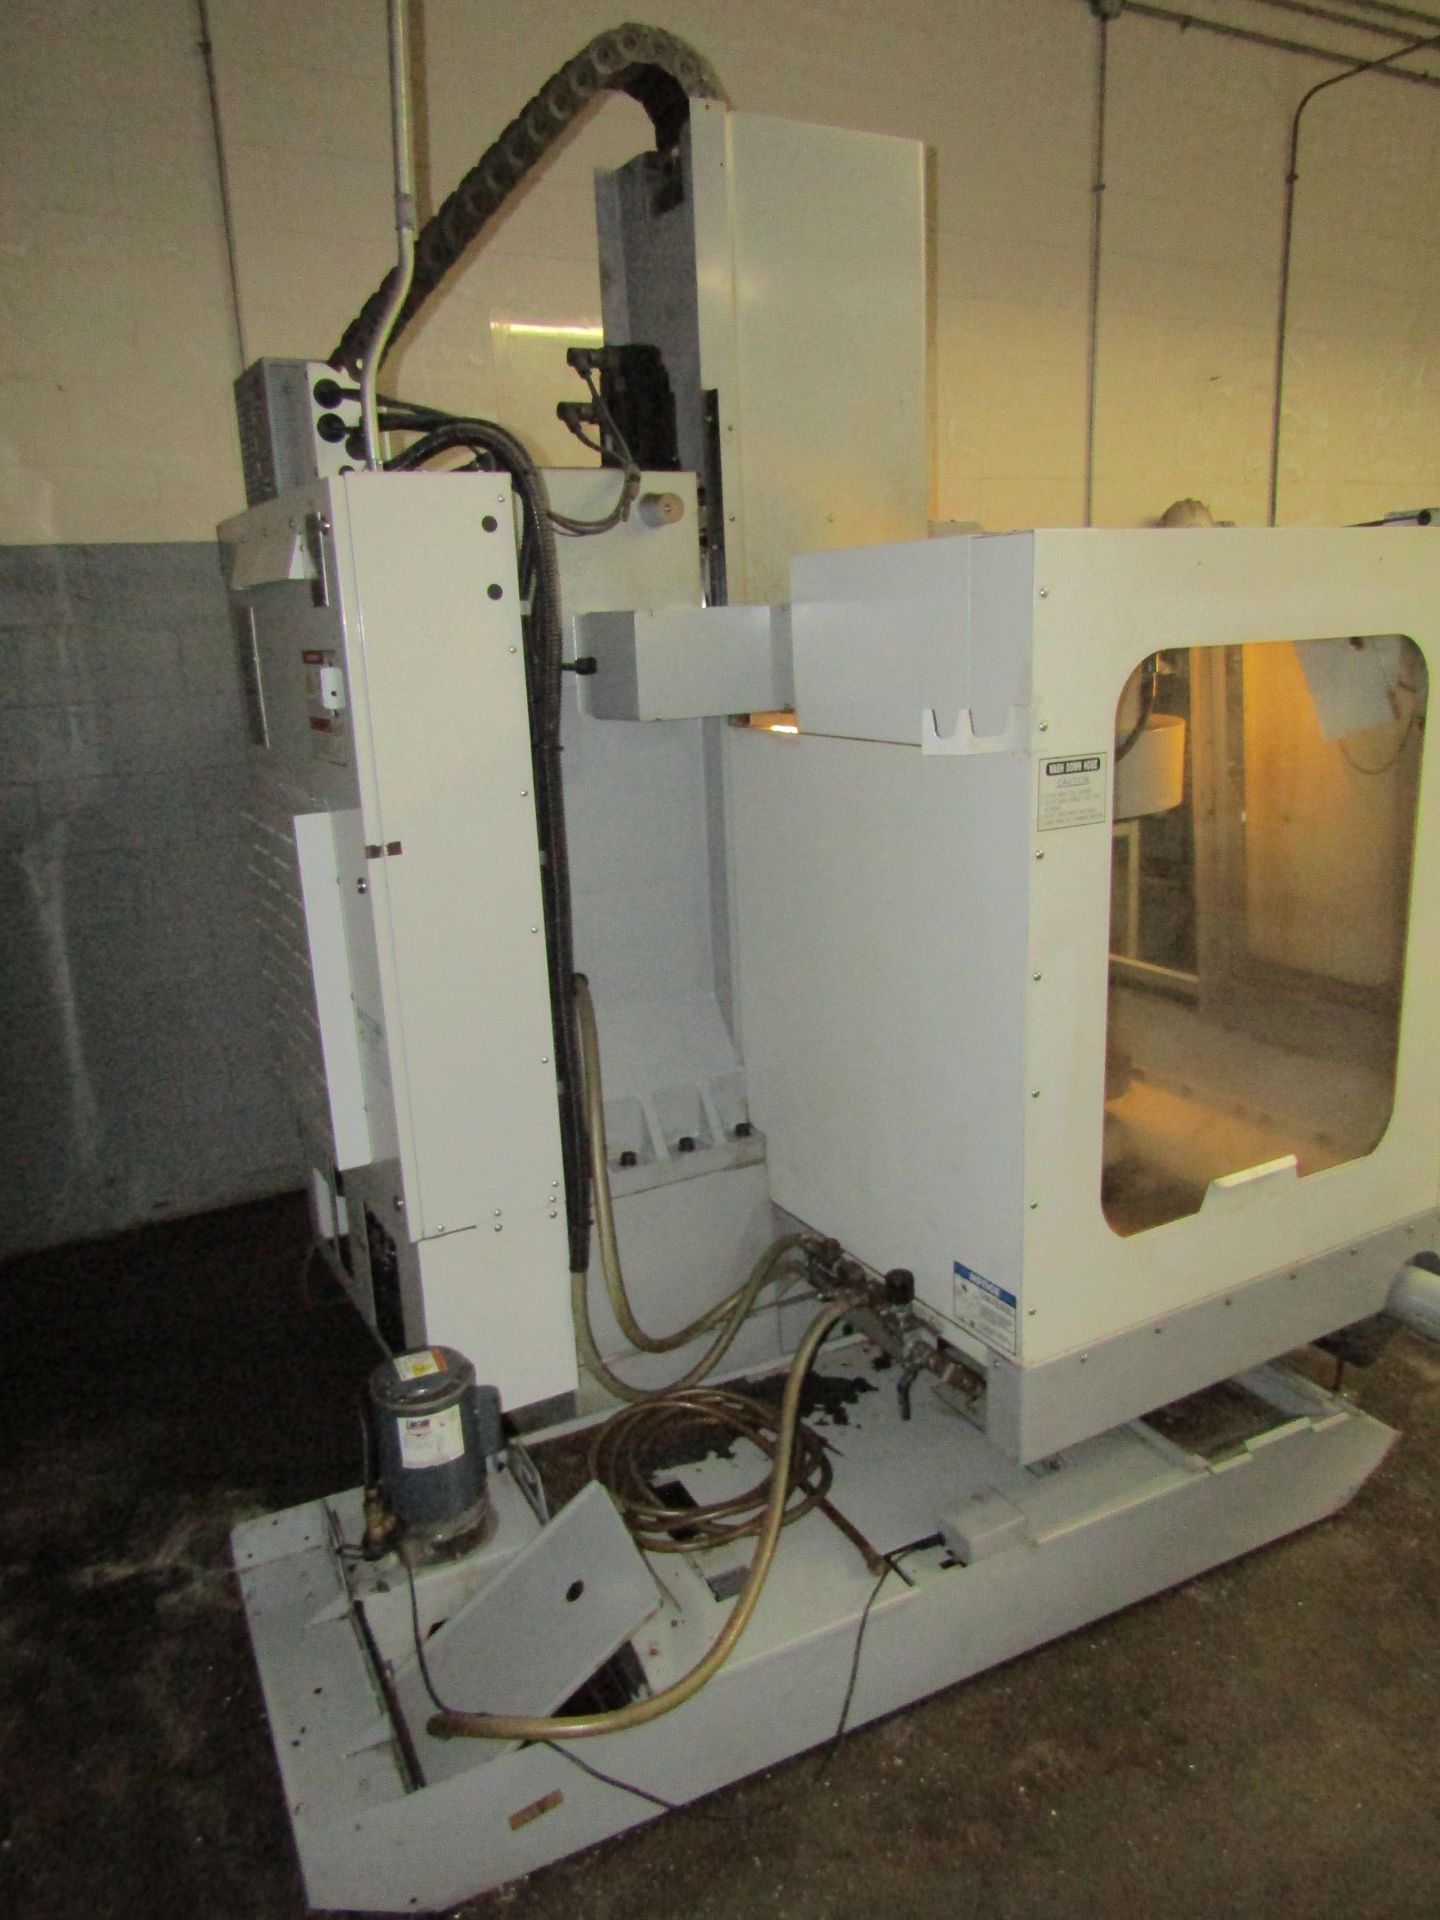 2006 HAAS VF-1D VERTICAL MACHINING CENTER, TRAVELS: 20 X 16 X 21, 21 ATC, HAAS CONTROL S/N: 1054610 - Image 10 of 12